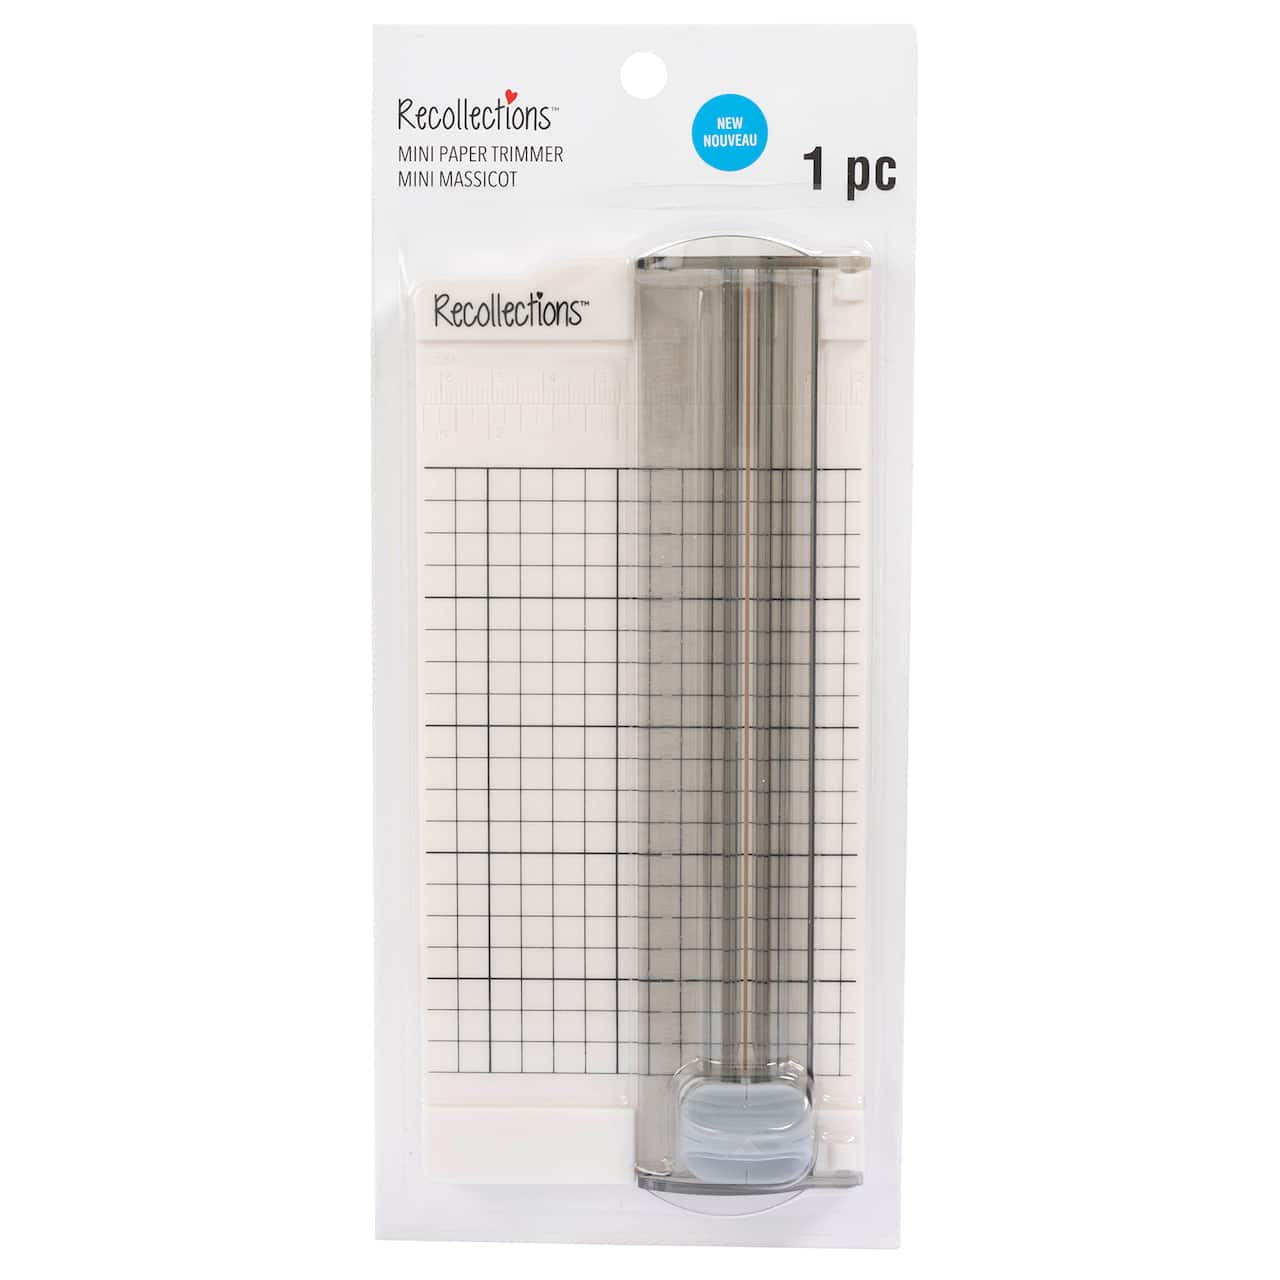 Mini Paper Trimmer by Recollections™